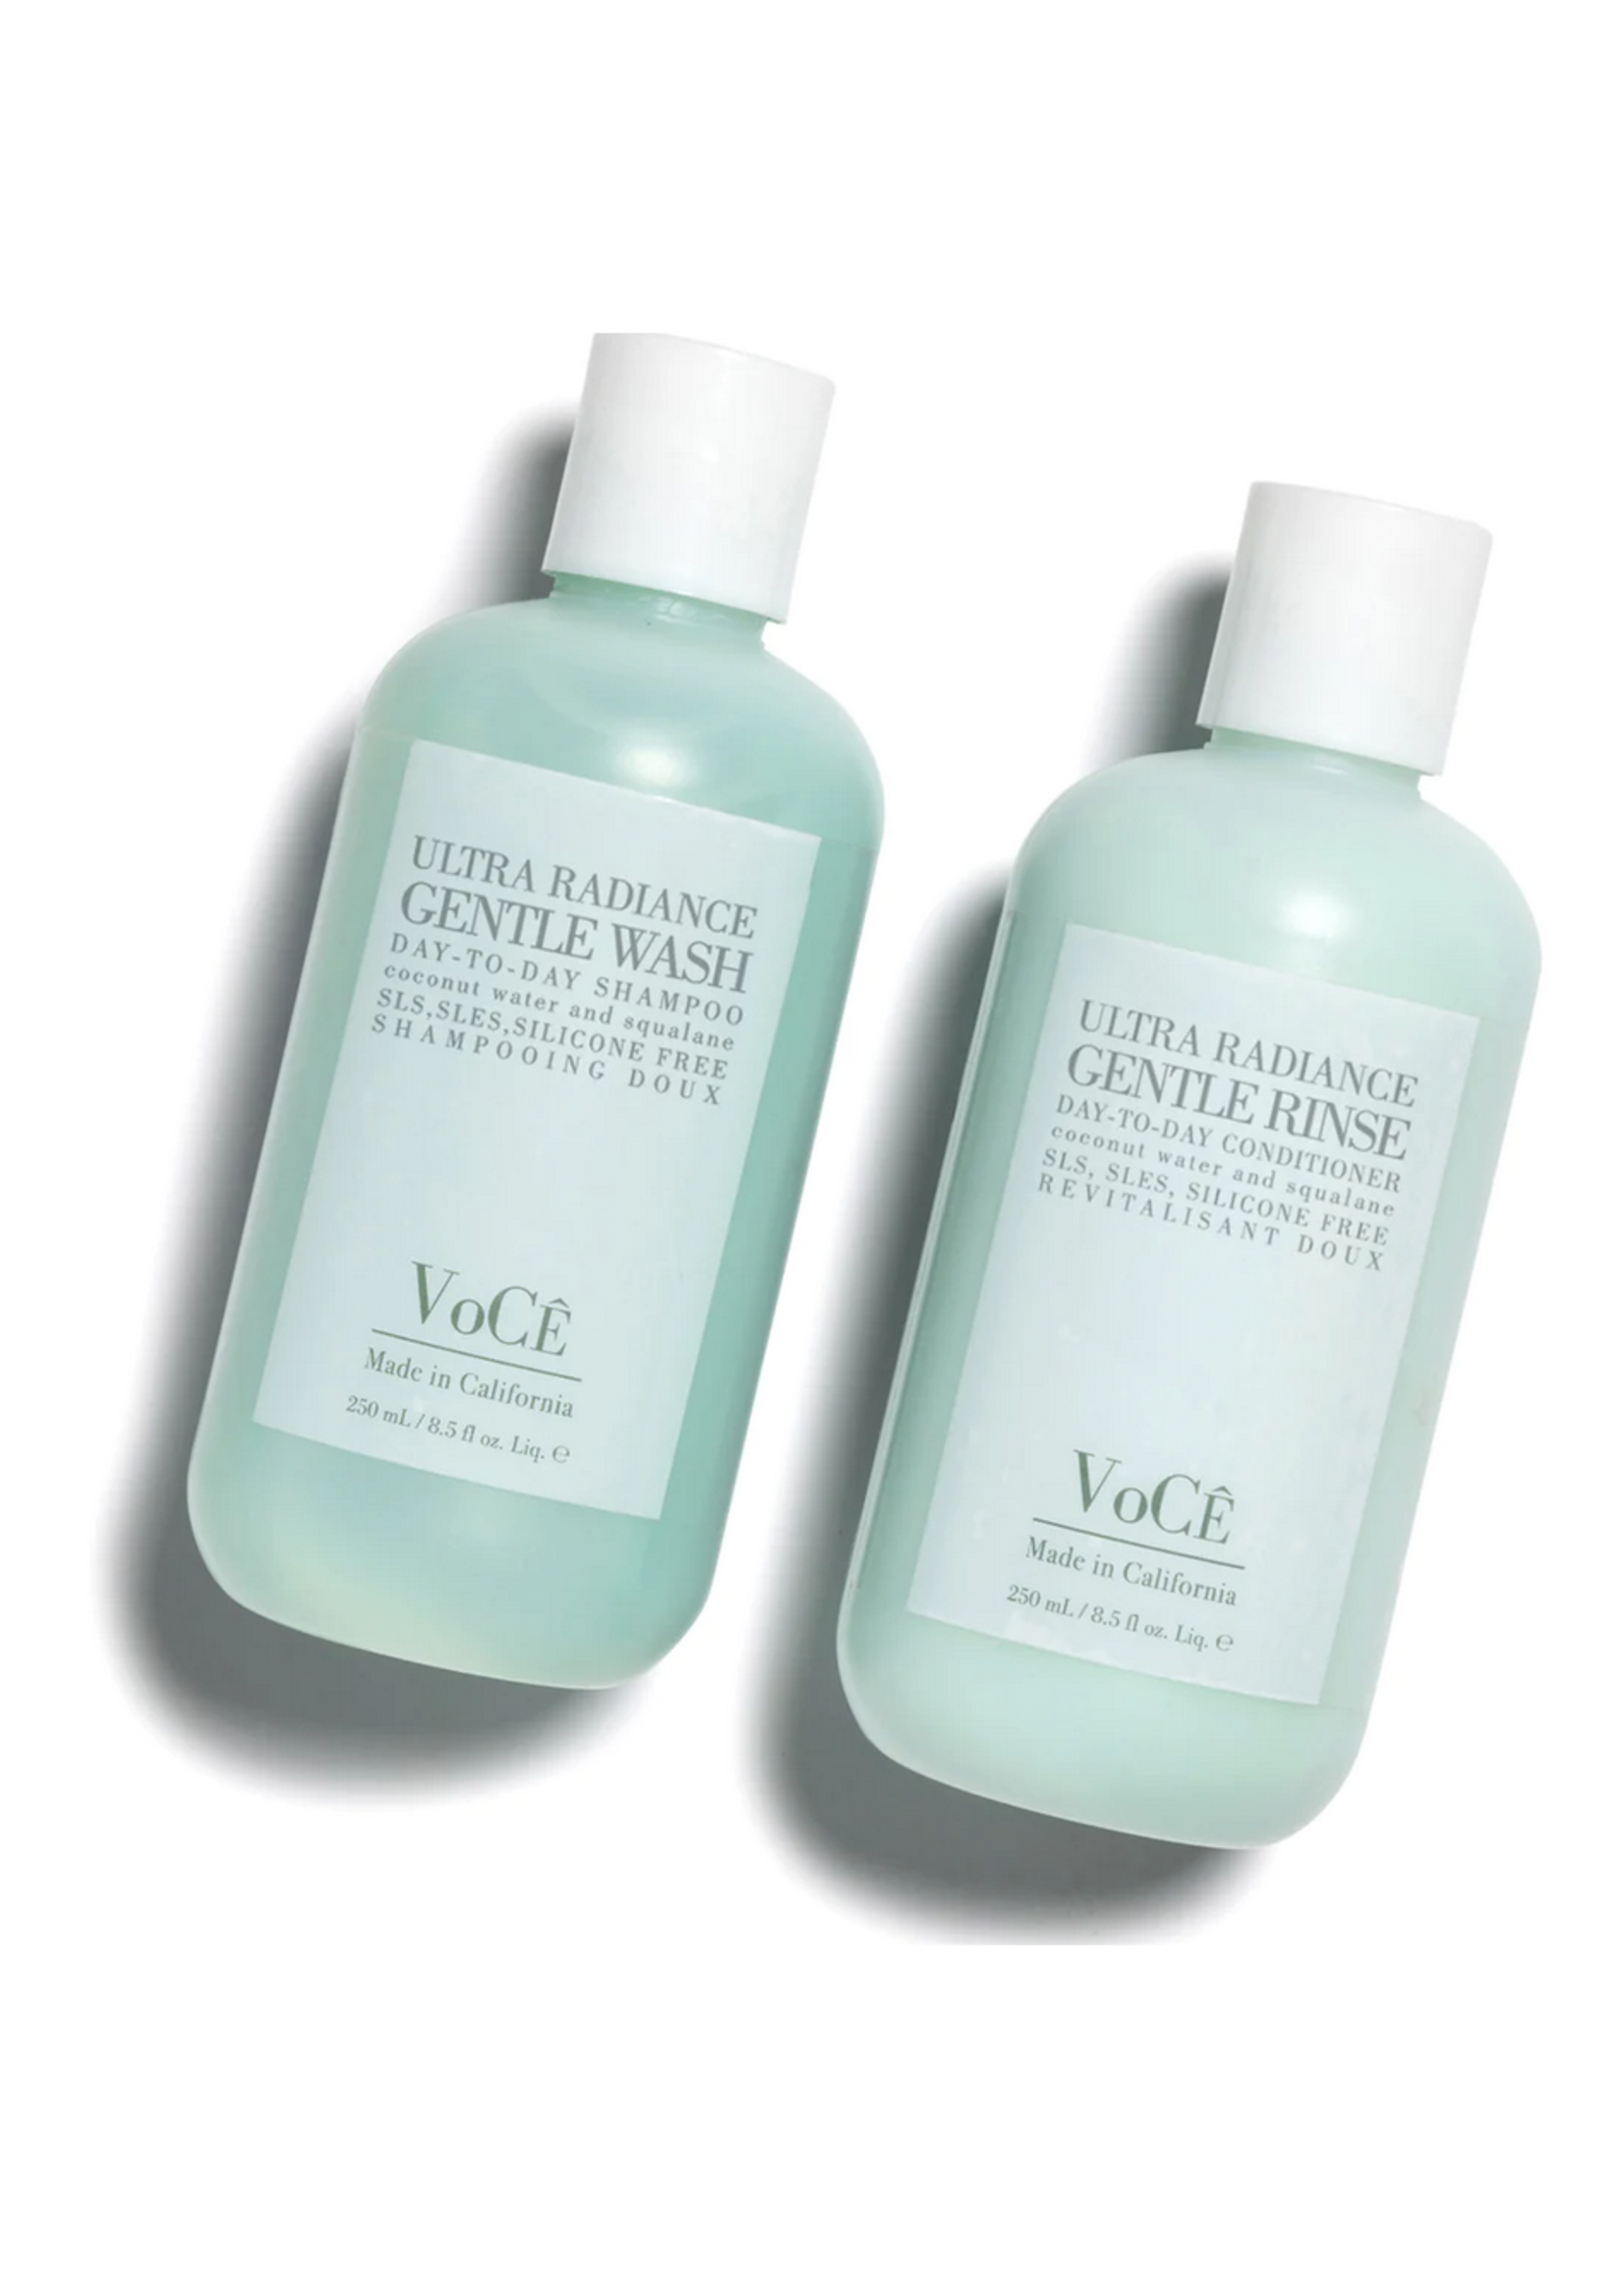 Voce Ultra Radiance Collection Body/Shampoo/Conditioner